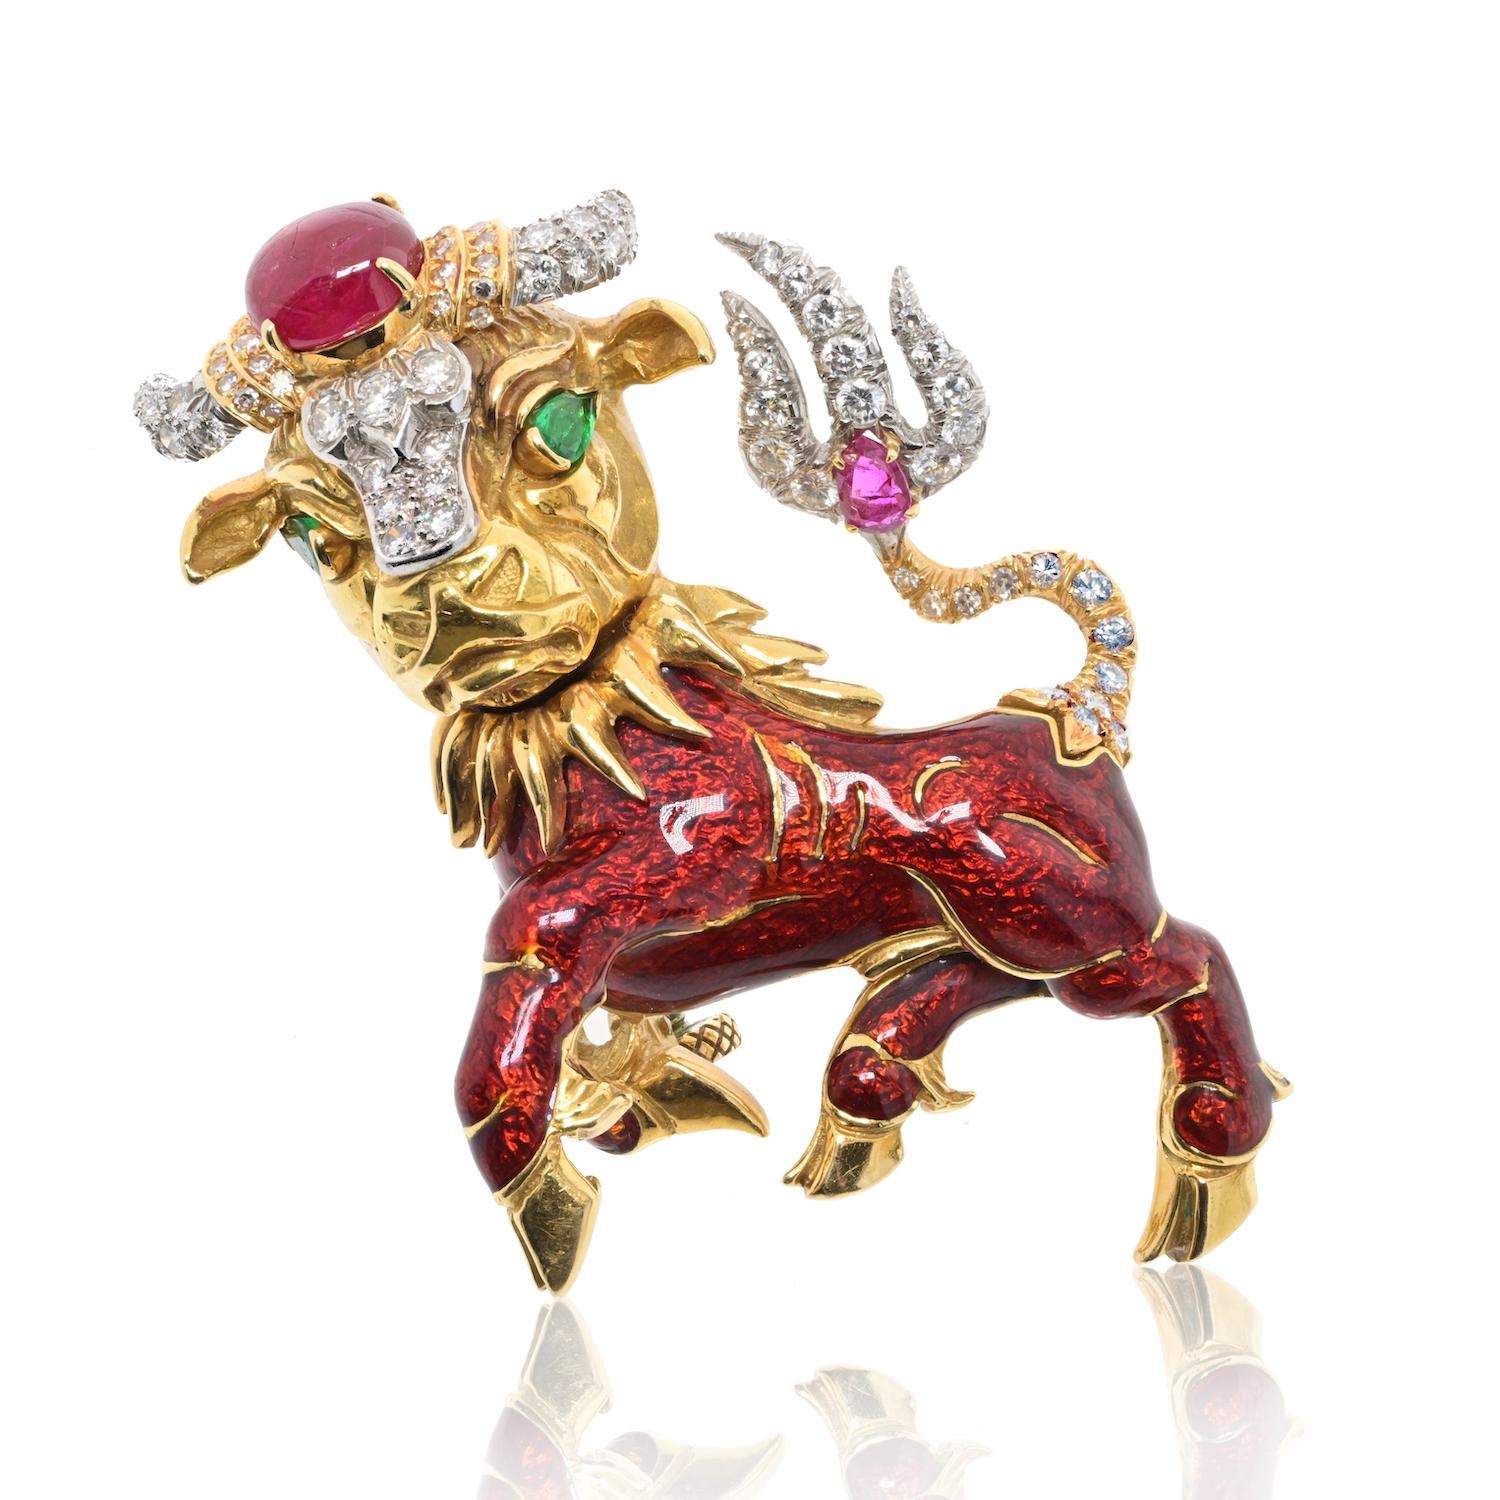 Step into the world of exquisite craftsmanship with the David Webb Pin, a captivating piece adorned with enamel, rubies, emeralds, and diamonds. 

Of taurus design, applied with red enamel and set with brilliant-cut diamonds, a ruby cabochon and